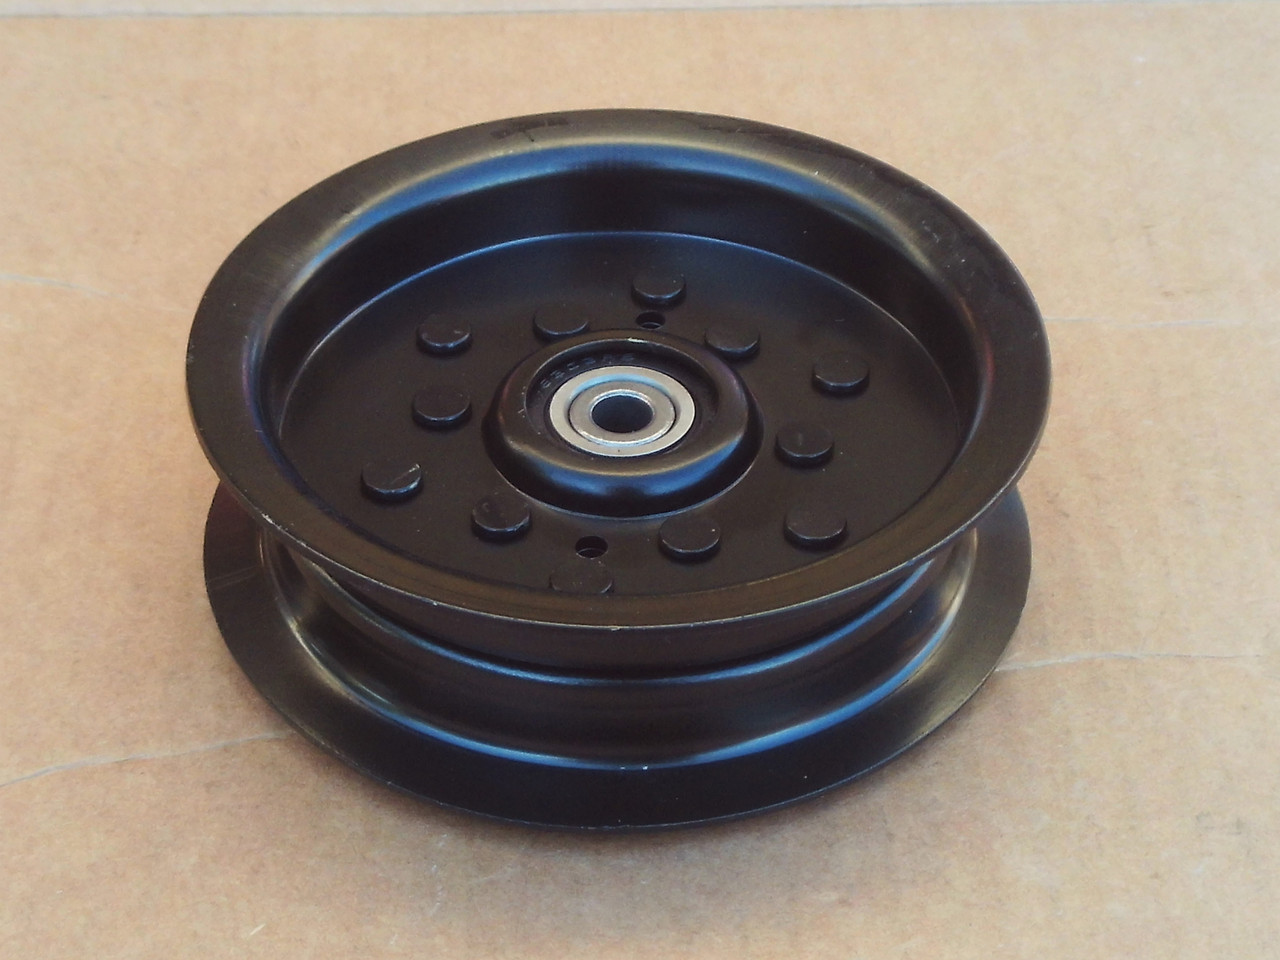 Idler Pulley for Poulan Pro 541ZX 54" 196106, 197379, 532196106 Height: 2" ID: 3/8" OD: 5-3/8"